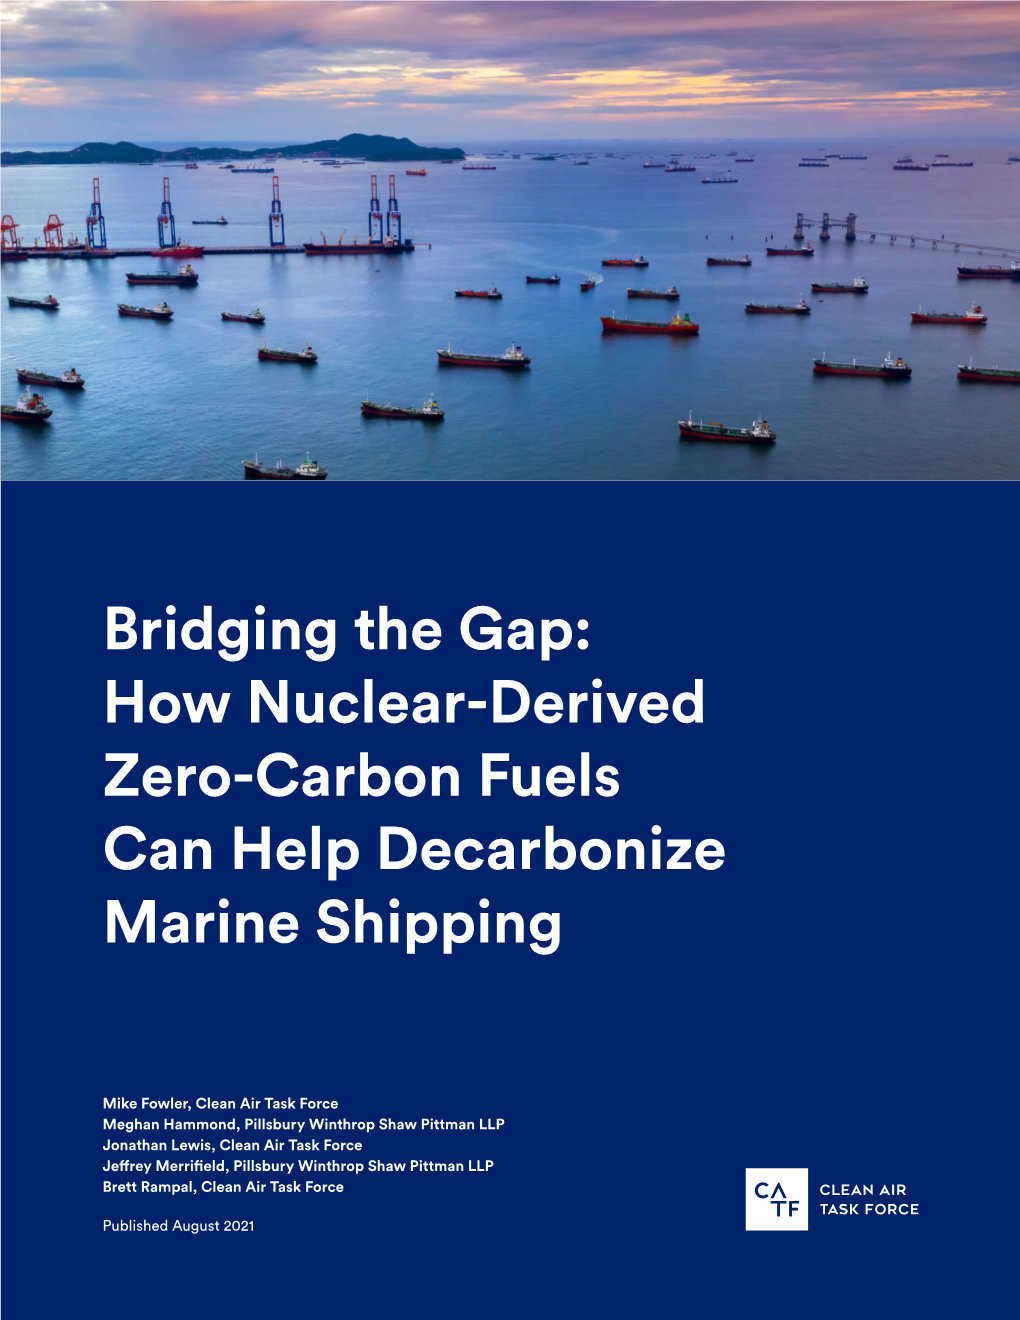 Bridging the Gap: How Nuclear-Derived Zero-Carbon Fuels Can Help Decarbonize Marine Shipping